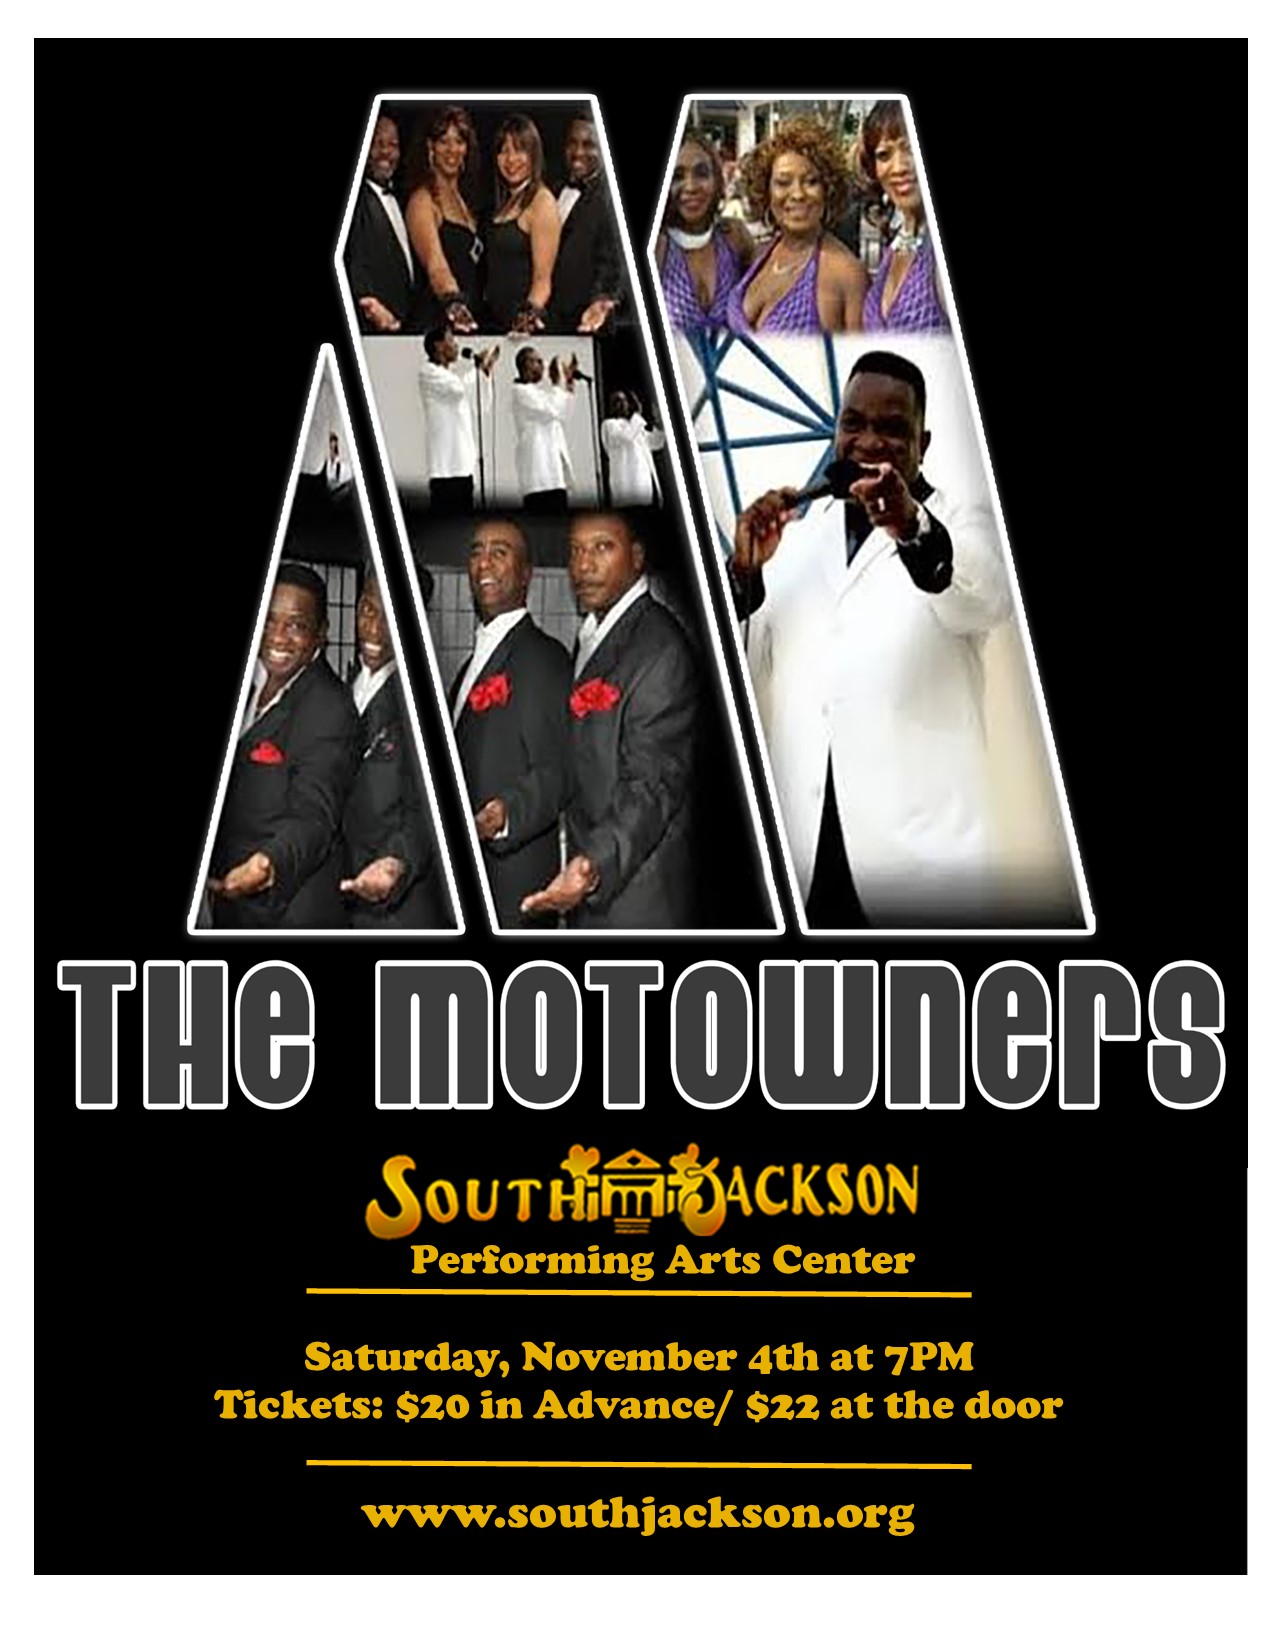 The Motowners Promo 3